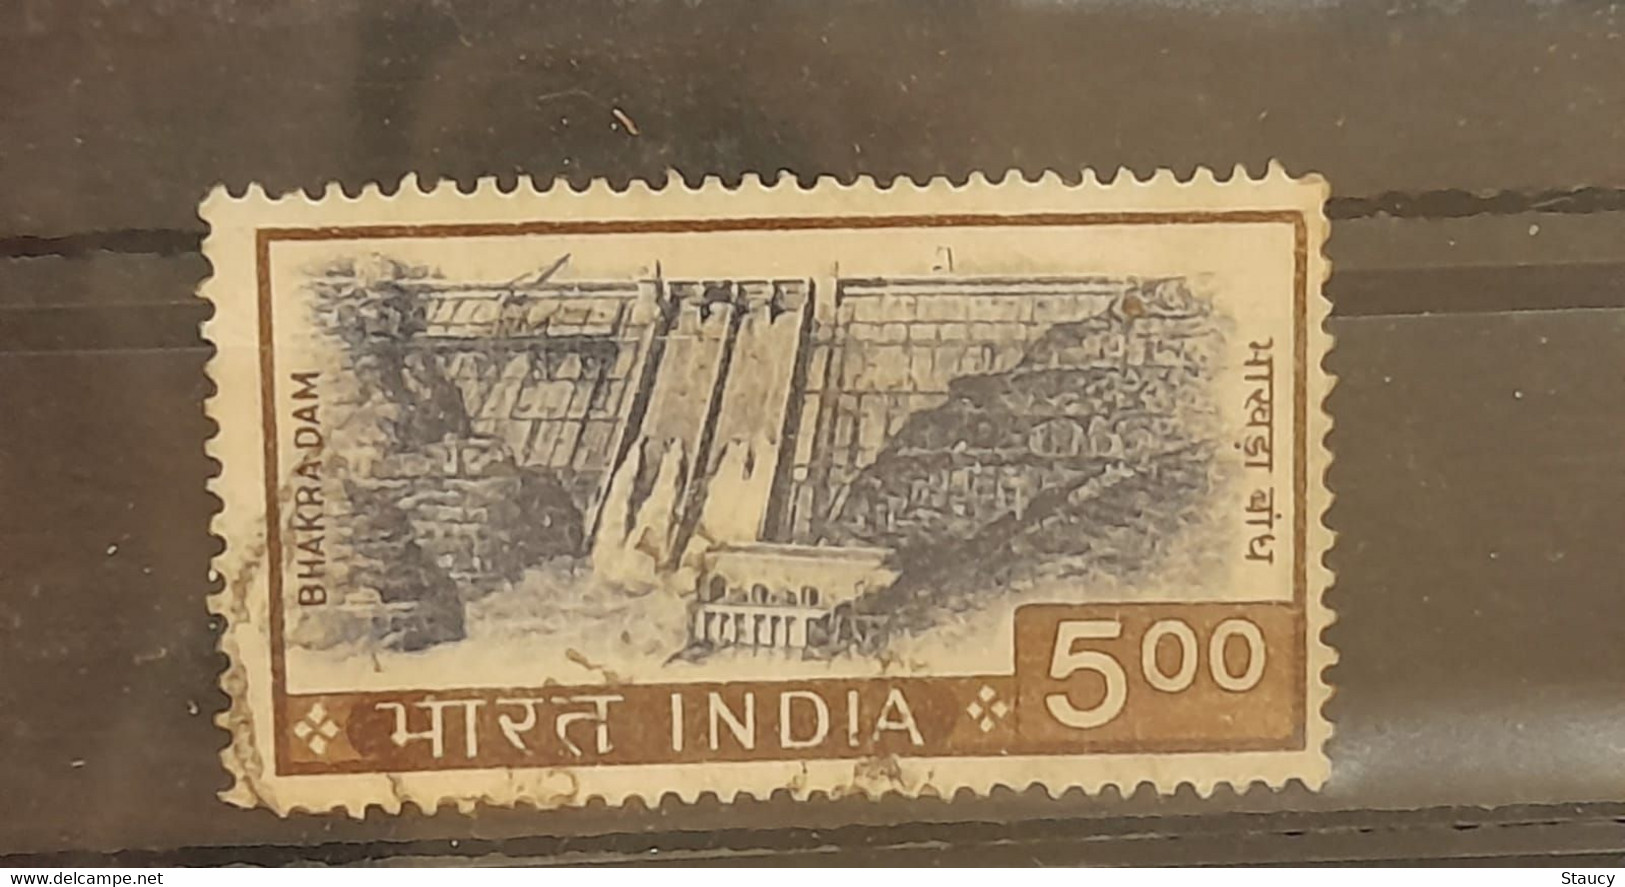 INDIA 1967 Rs.5.00 Bhakra Dam (1965 - 1975 Definitive Series) 1v Used Condition As Per Scan - Used Stamps